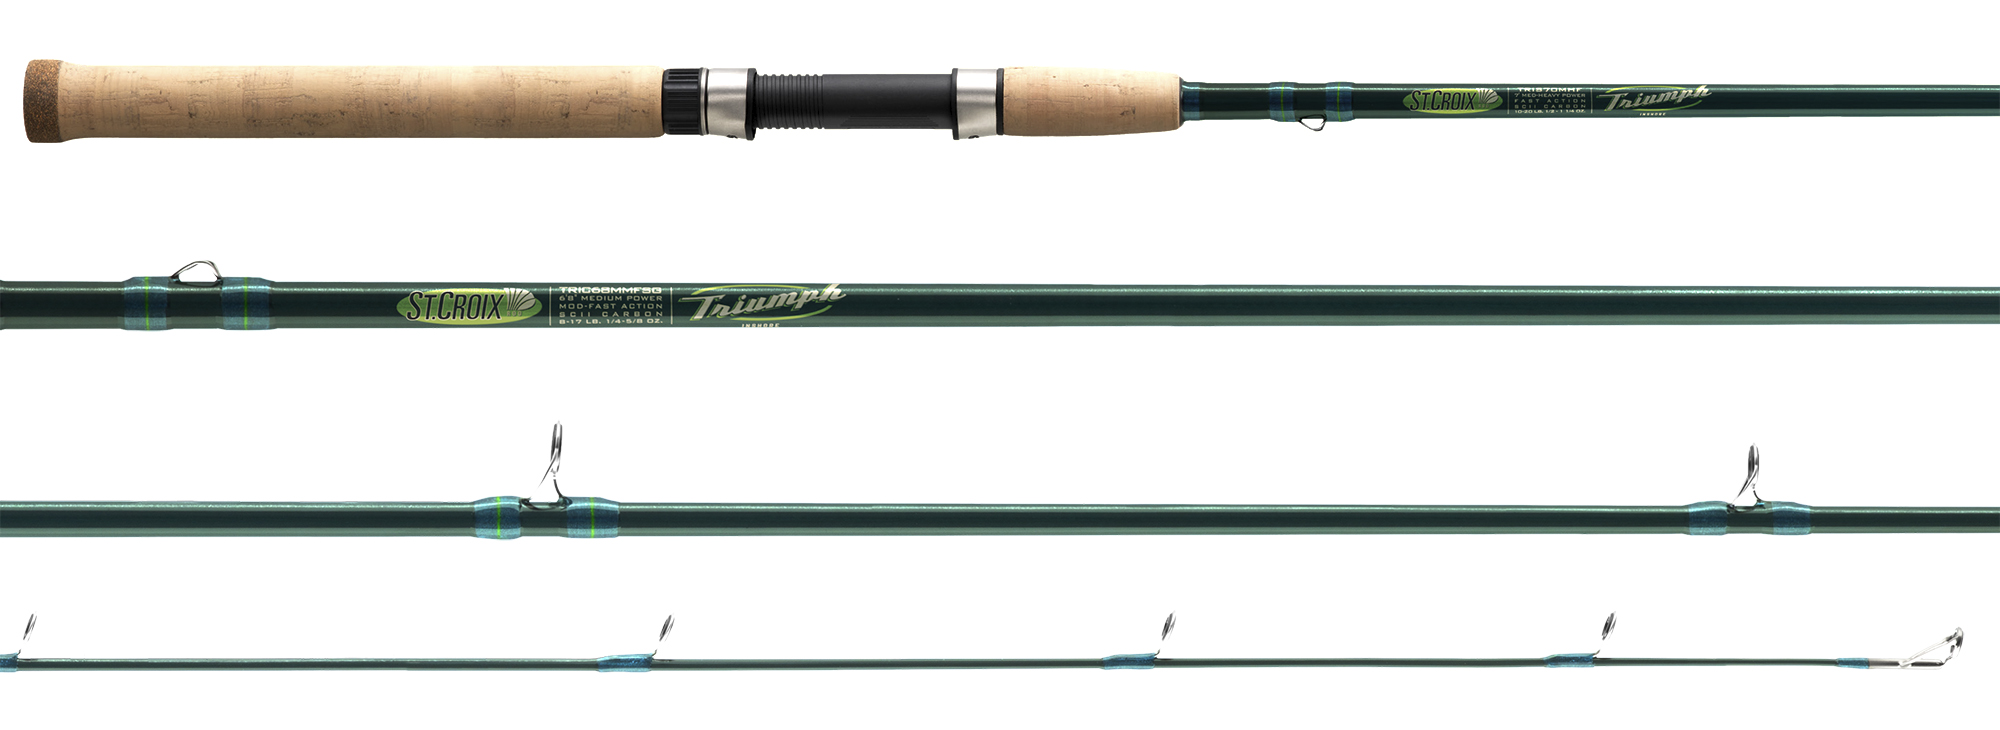 https://i.tackledirect.com/images/imgfull/st-croix-tris76mhf-triumph-inshore-spinning-rod.jpg